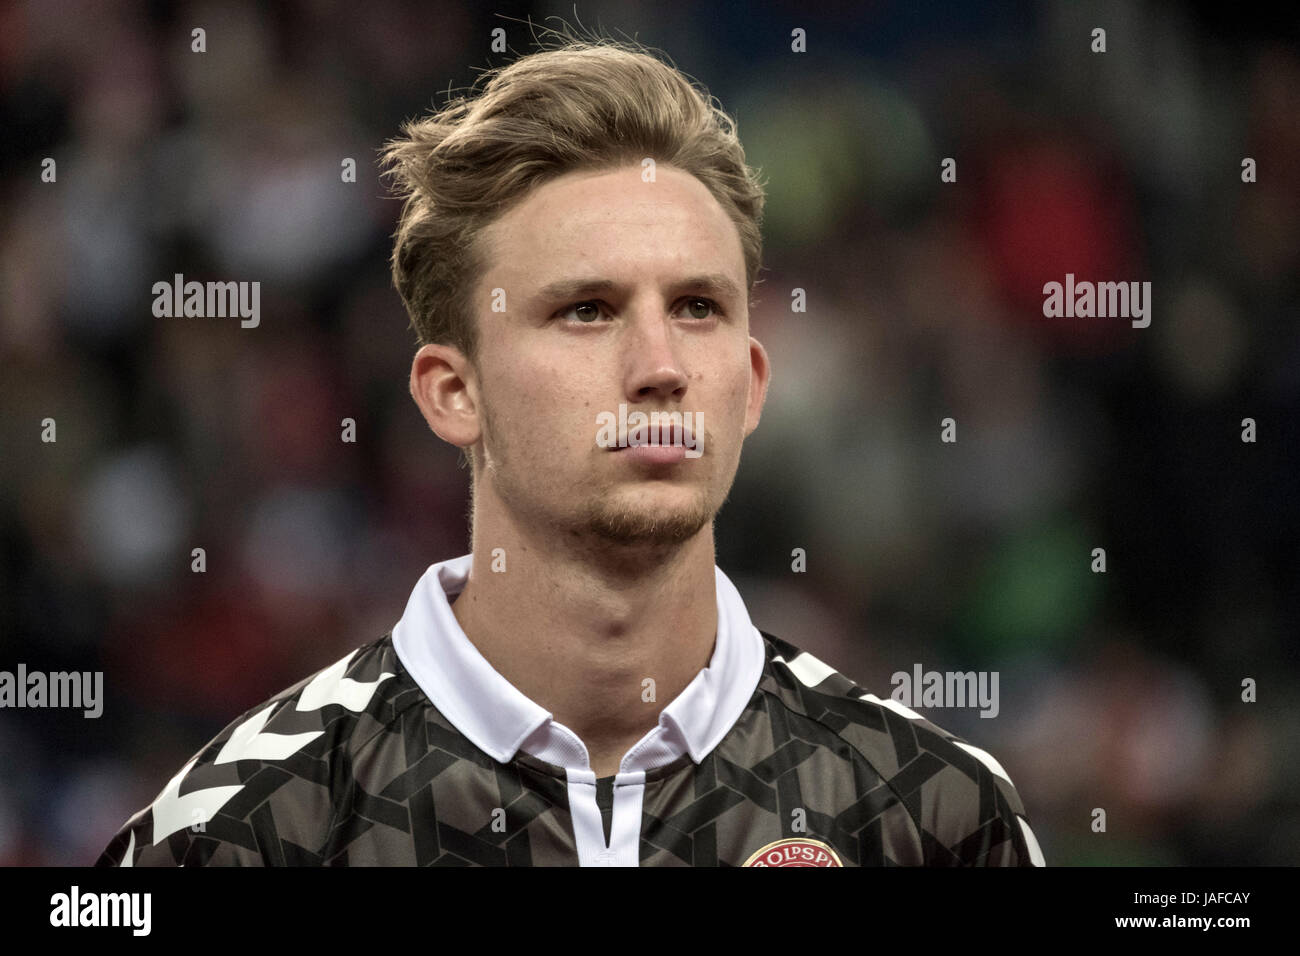 Brondby, Denmark. 6th Jun, 2017. Goalkeeper Frederik Ronnow of Denmark seen during the football friendly between Denmark and Germany at Brondby Stadium. Credit: Gonzales Photo/Alamy Live News Stock Photo